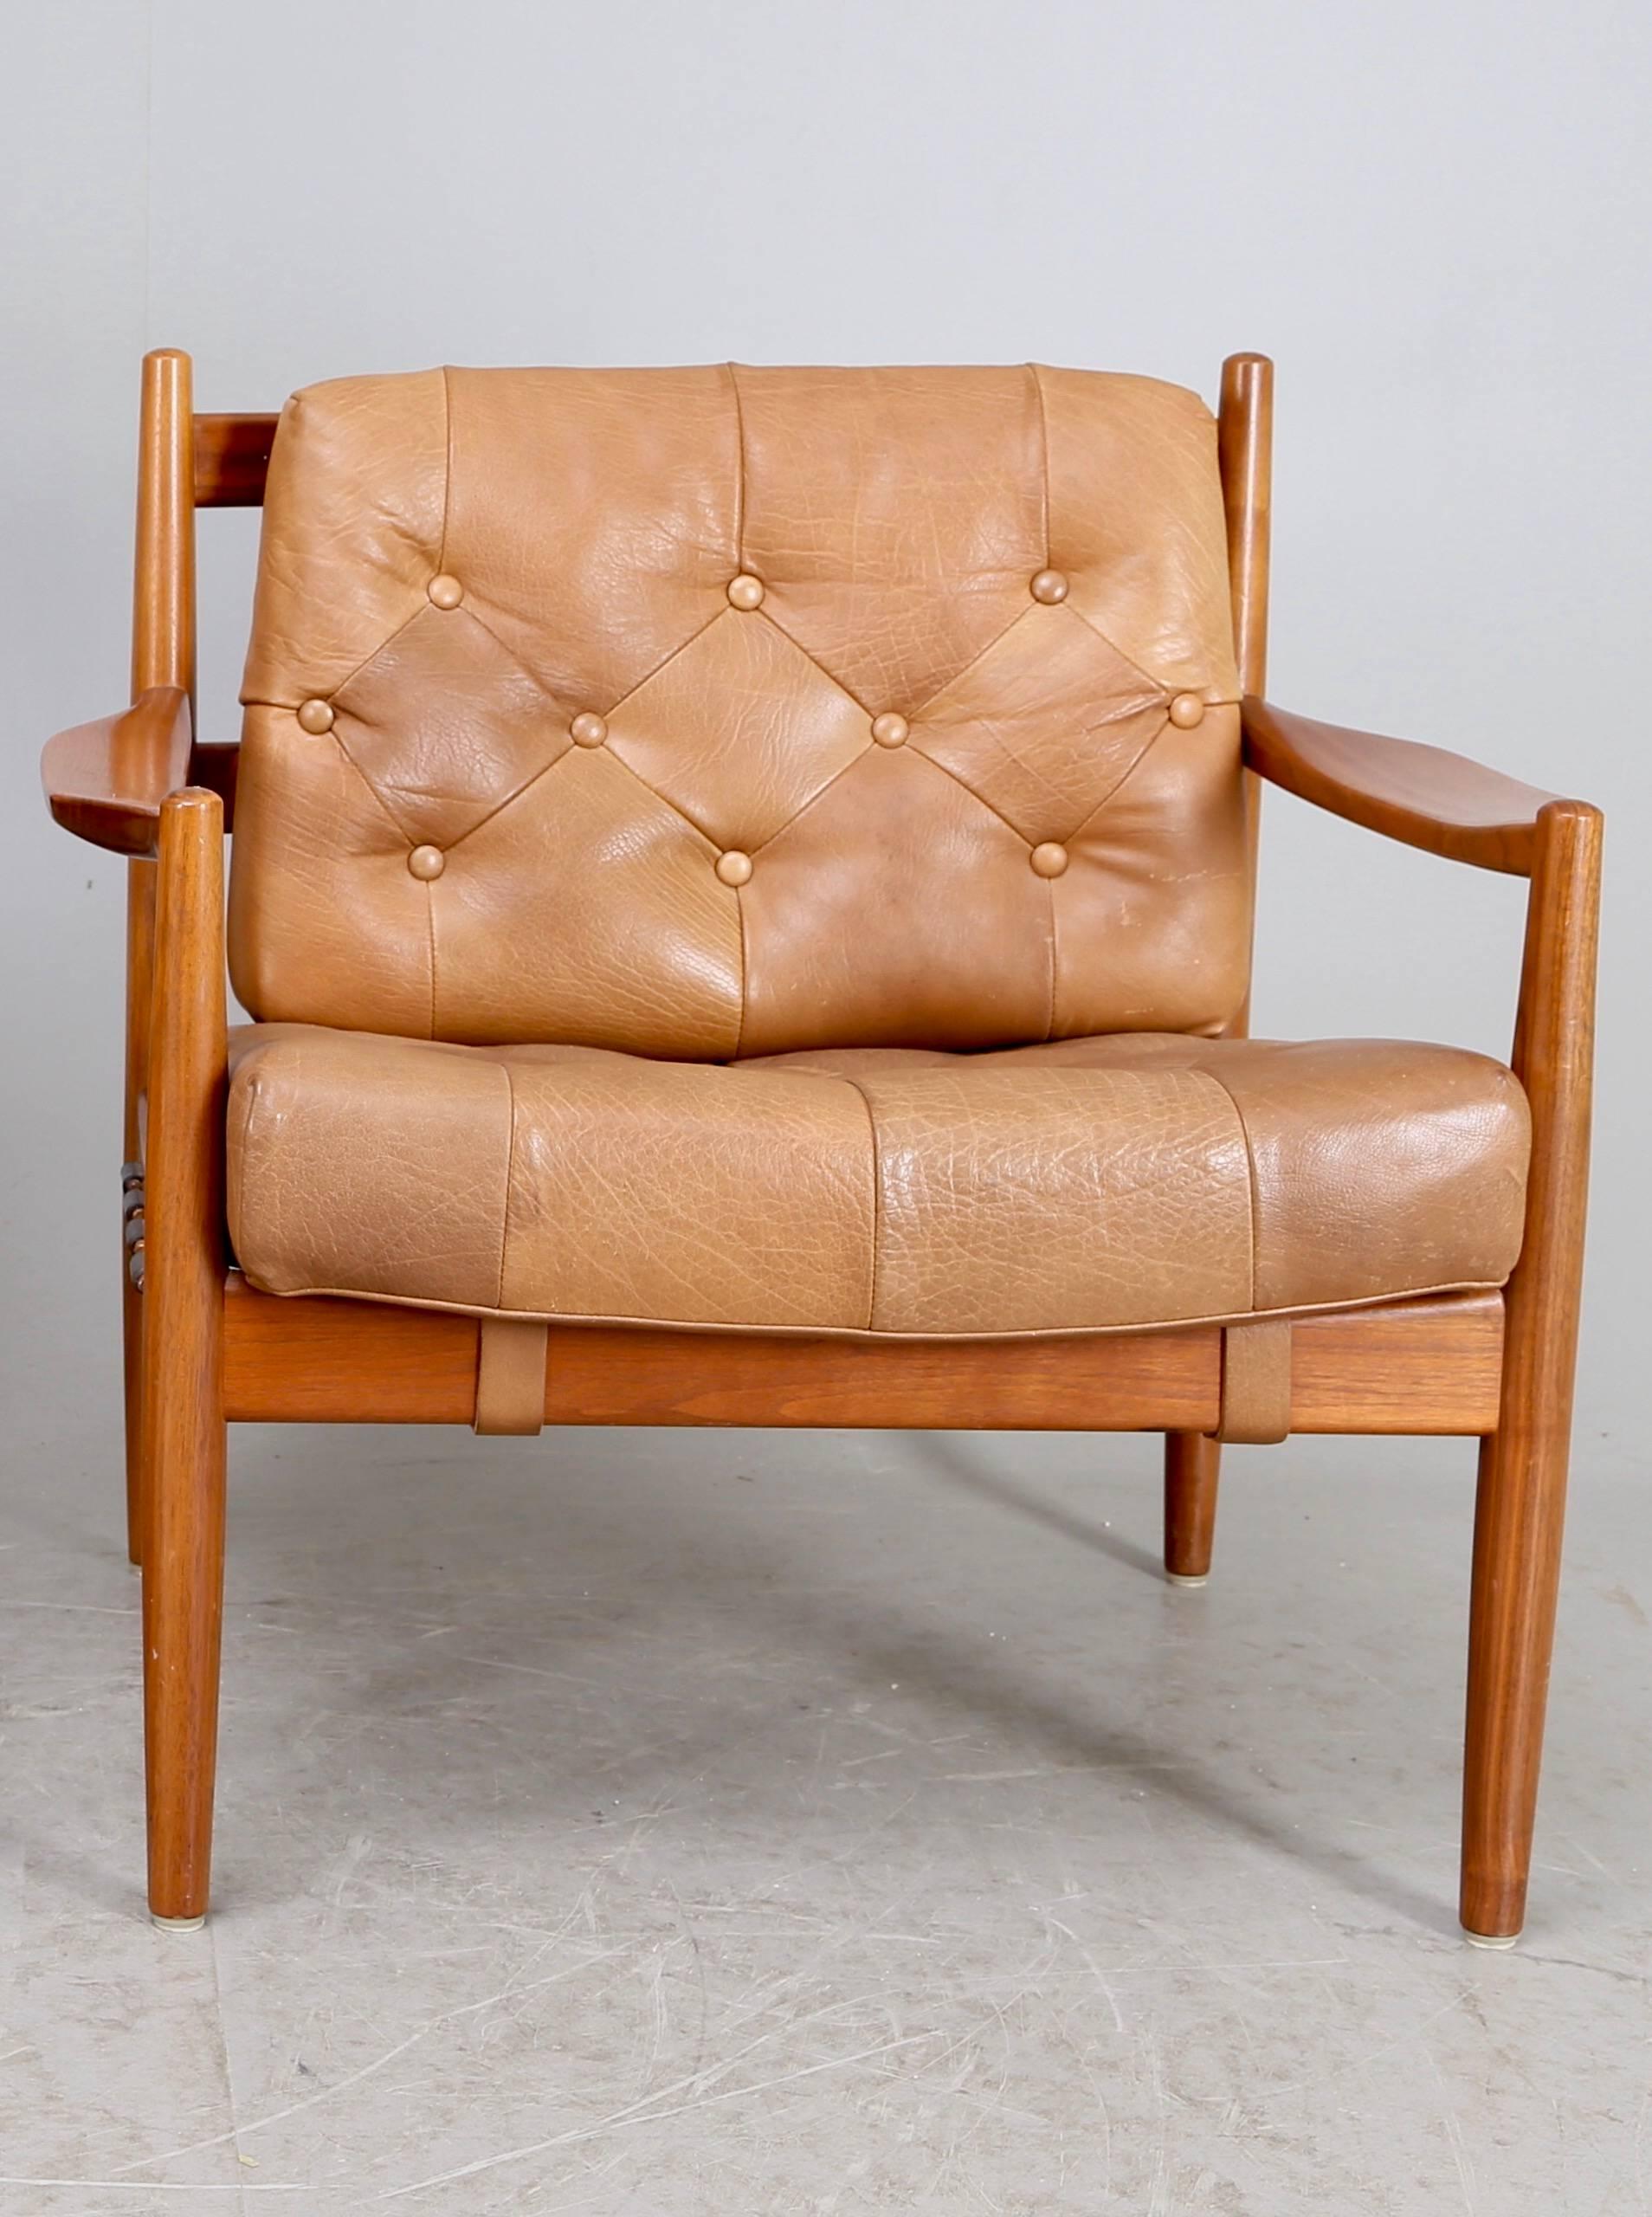 Swedish Pair of Armchairs by Ingemar Thillmark for OPE Mobler, Midcentury Modern